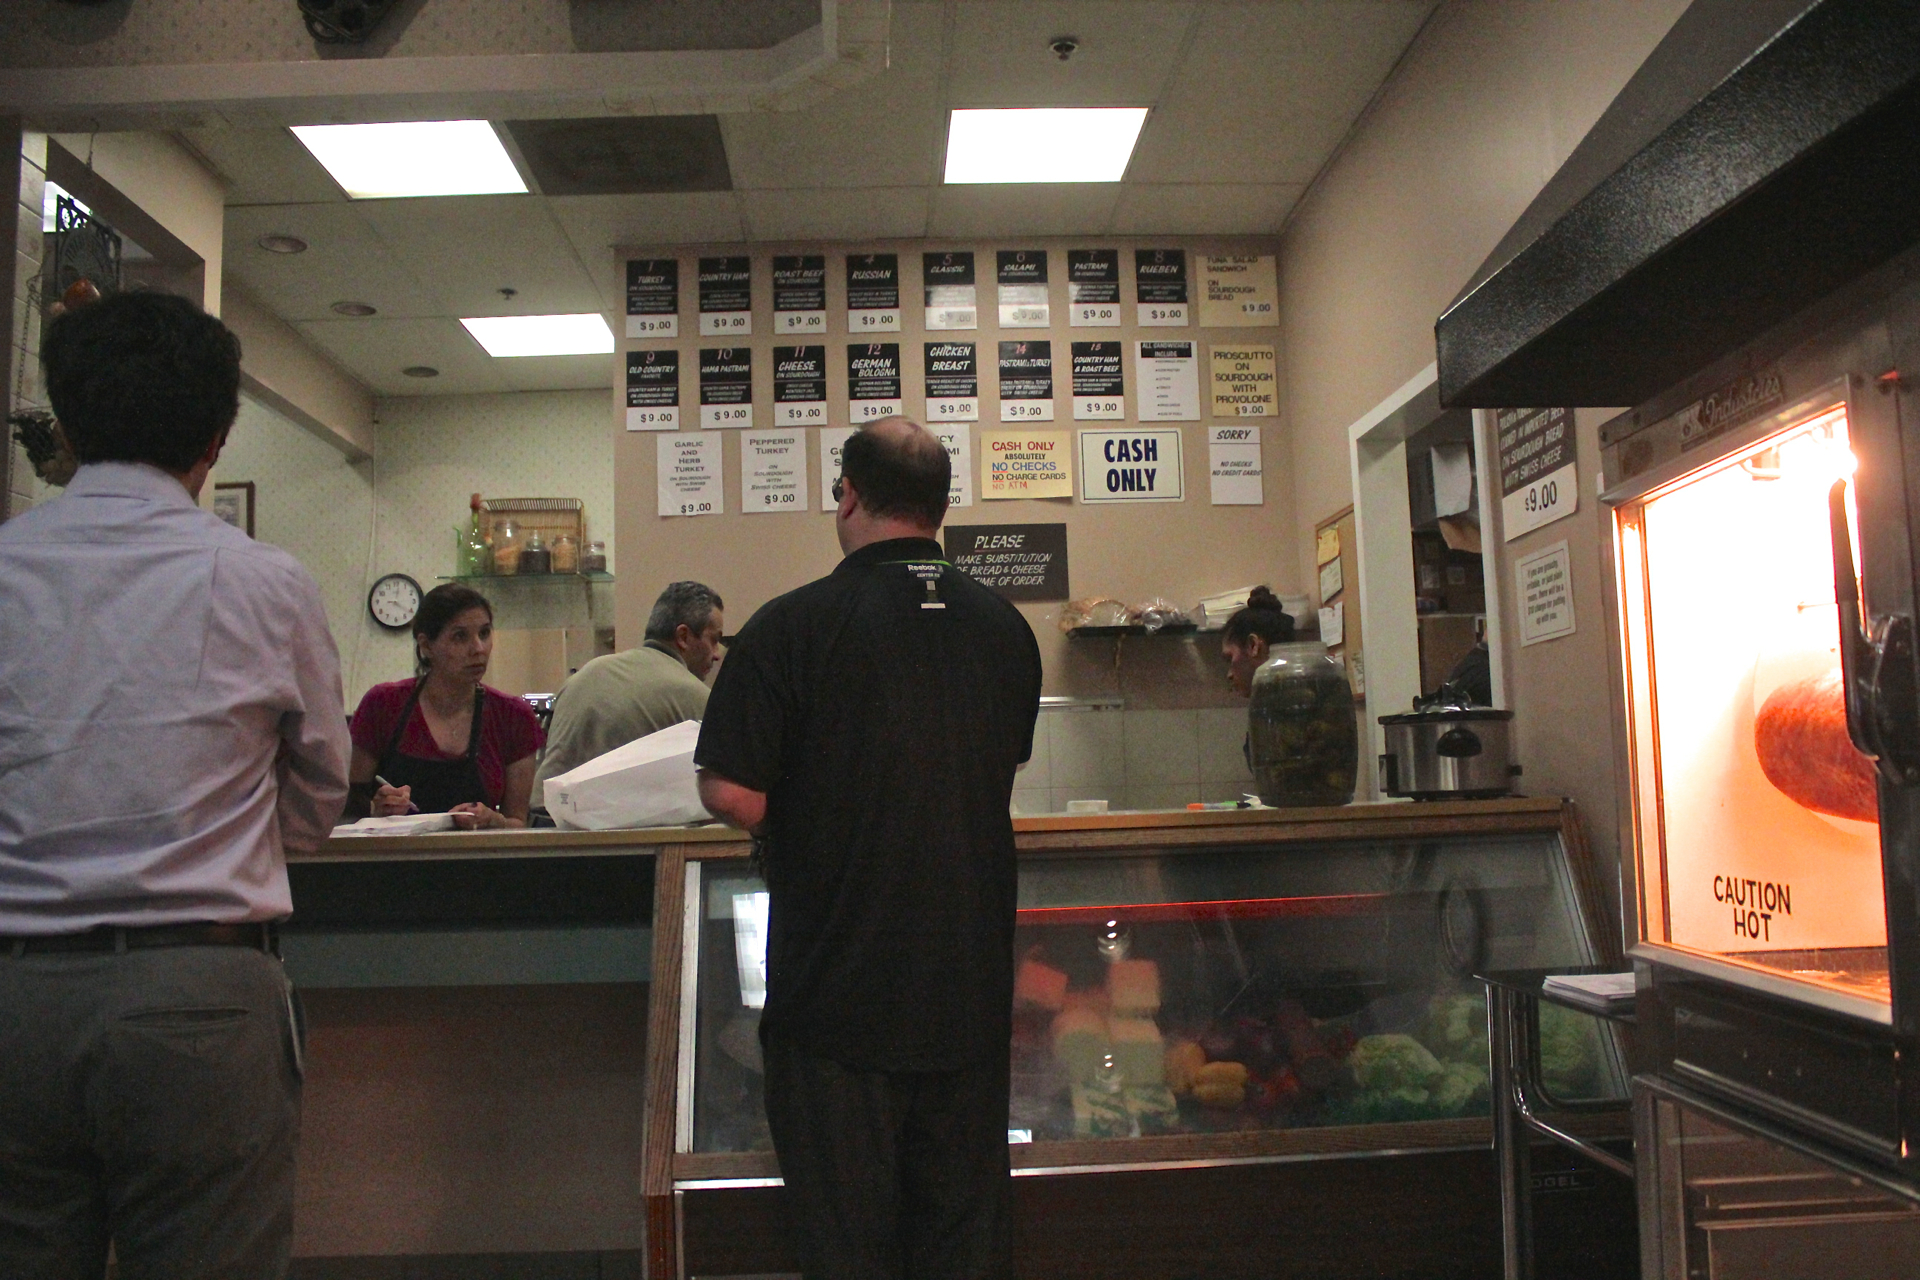 Customers ordering at the counter of Freshly Baked Eatery.